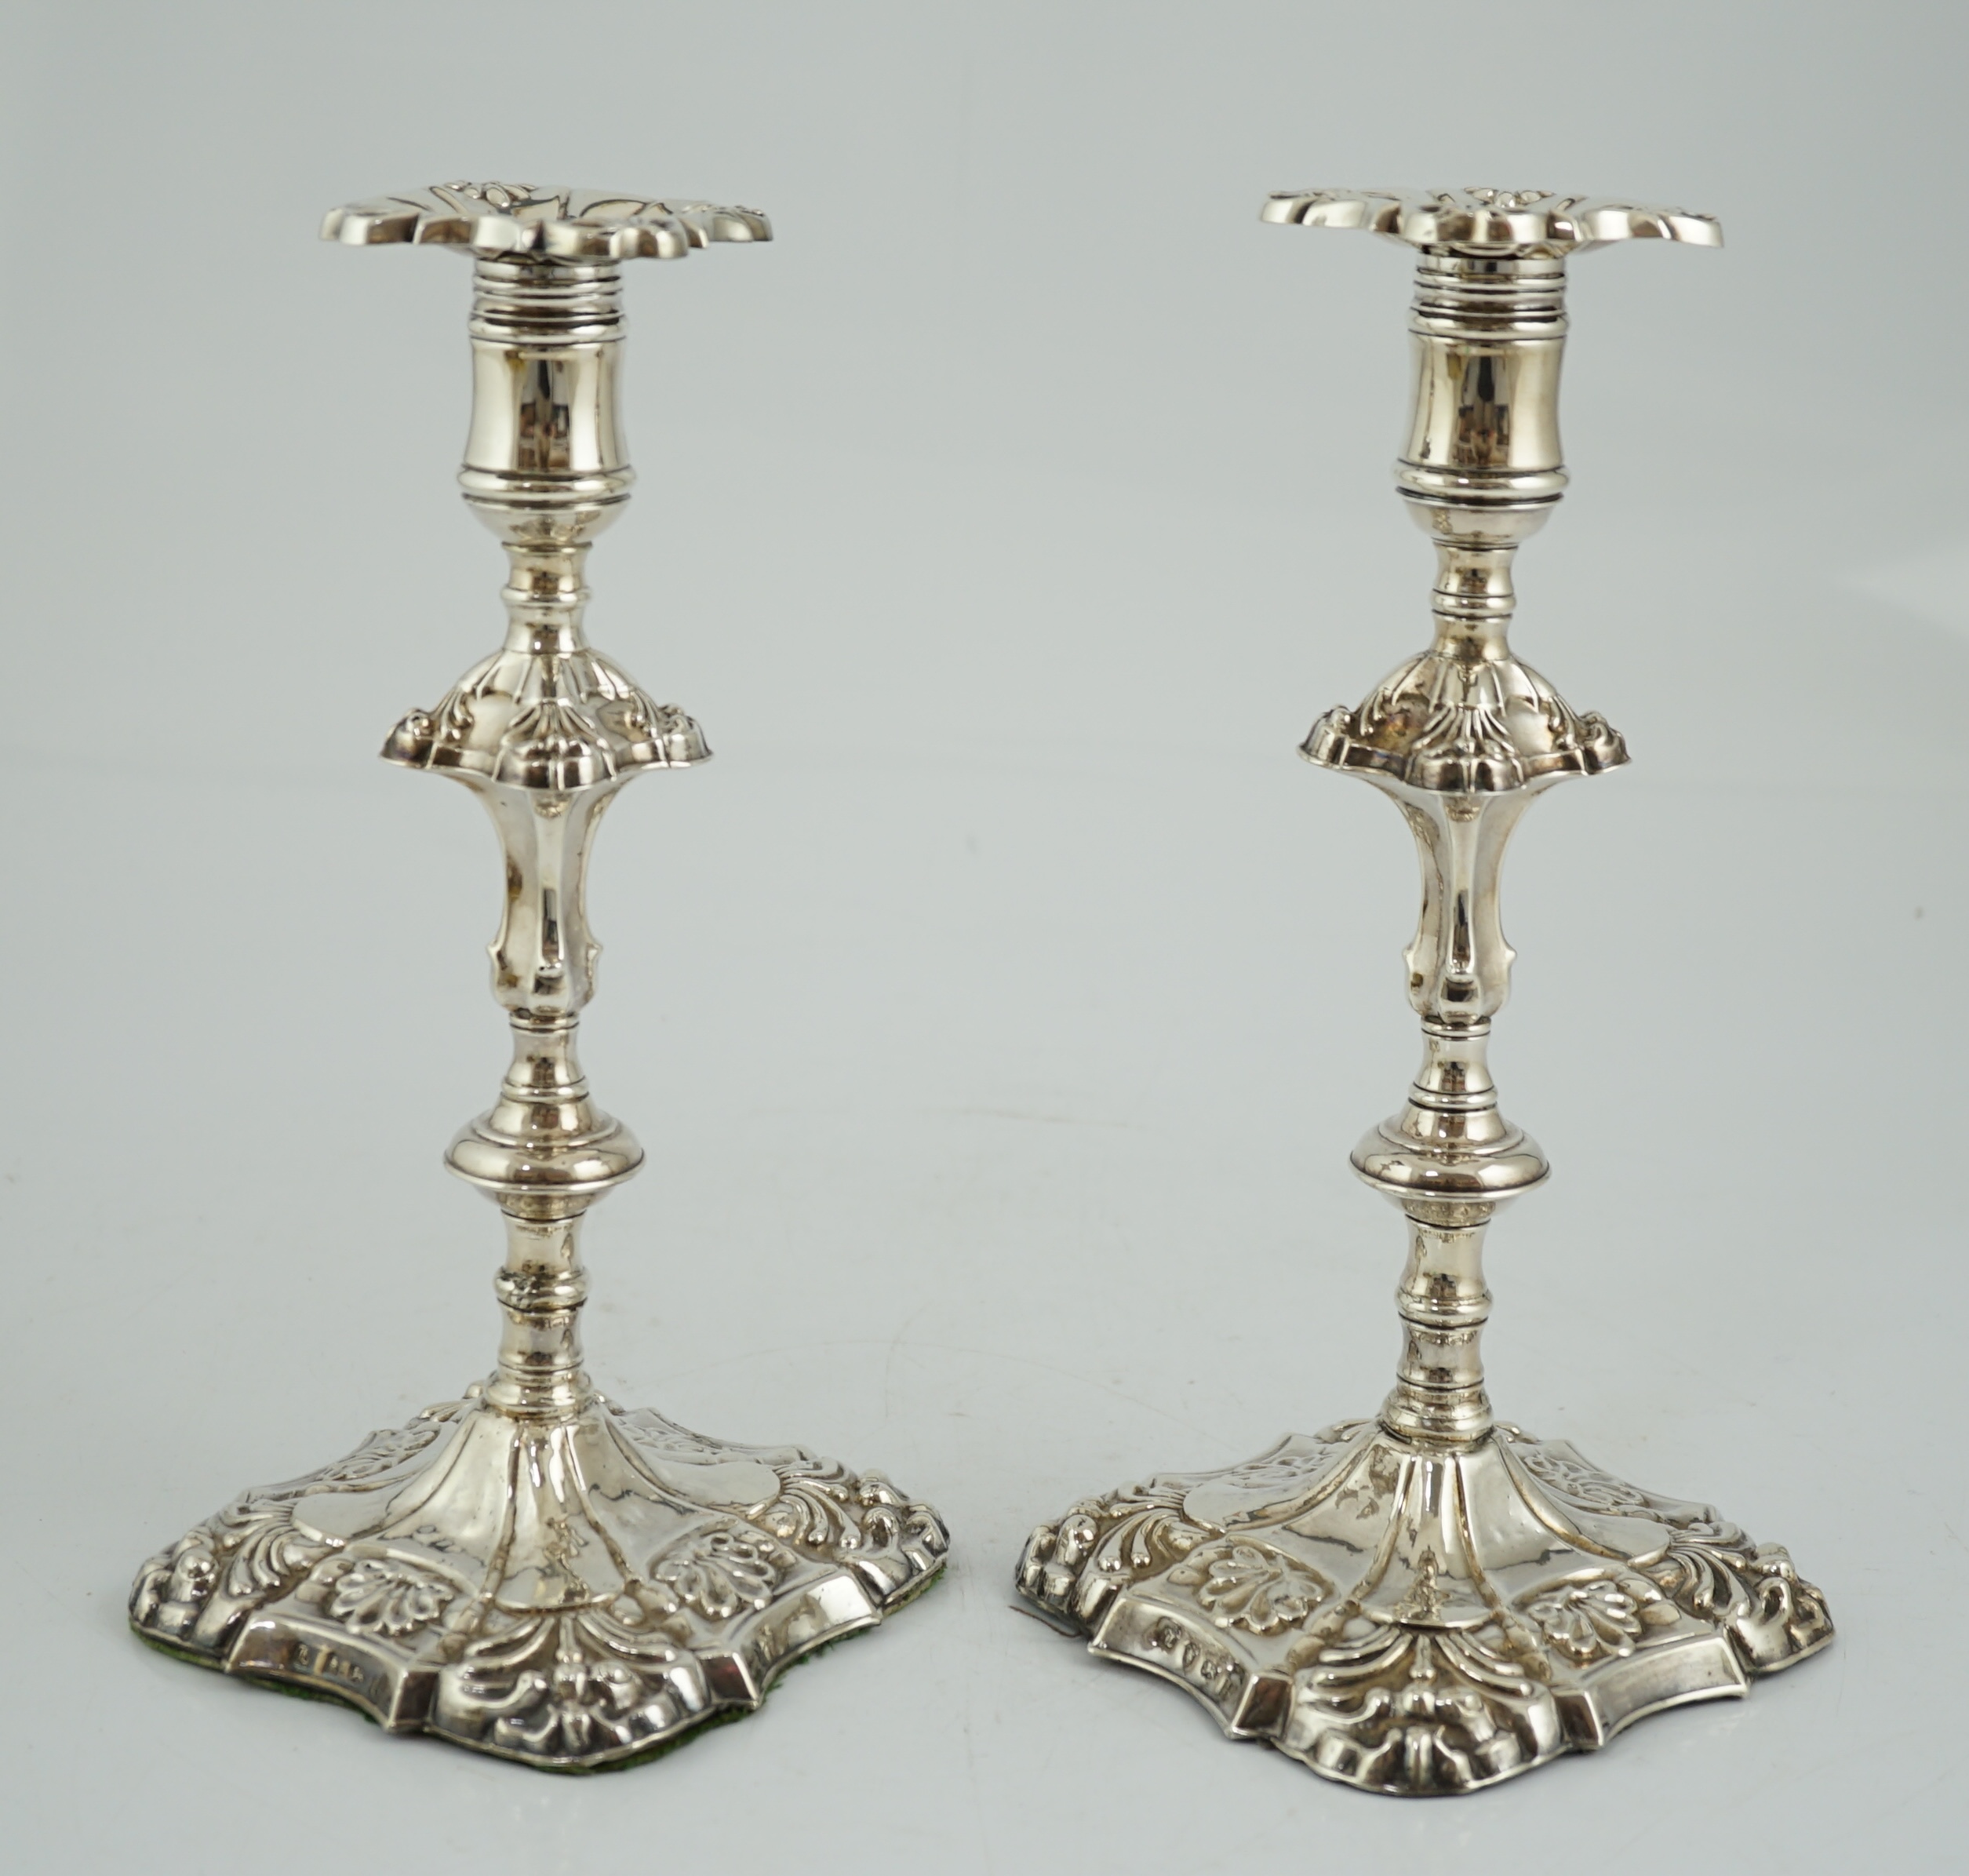 A pair of early George III silver candlesticks, by James Stamp & John Baker